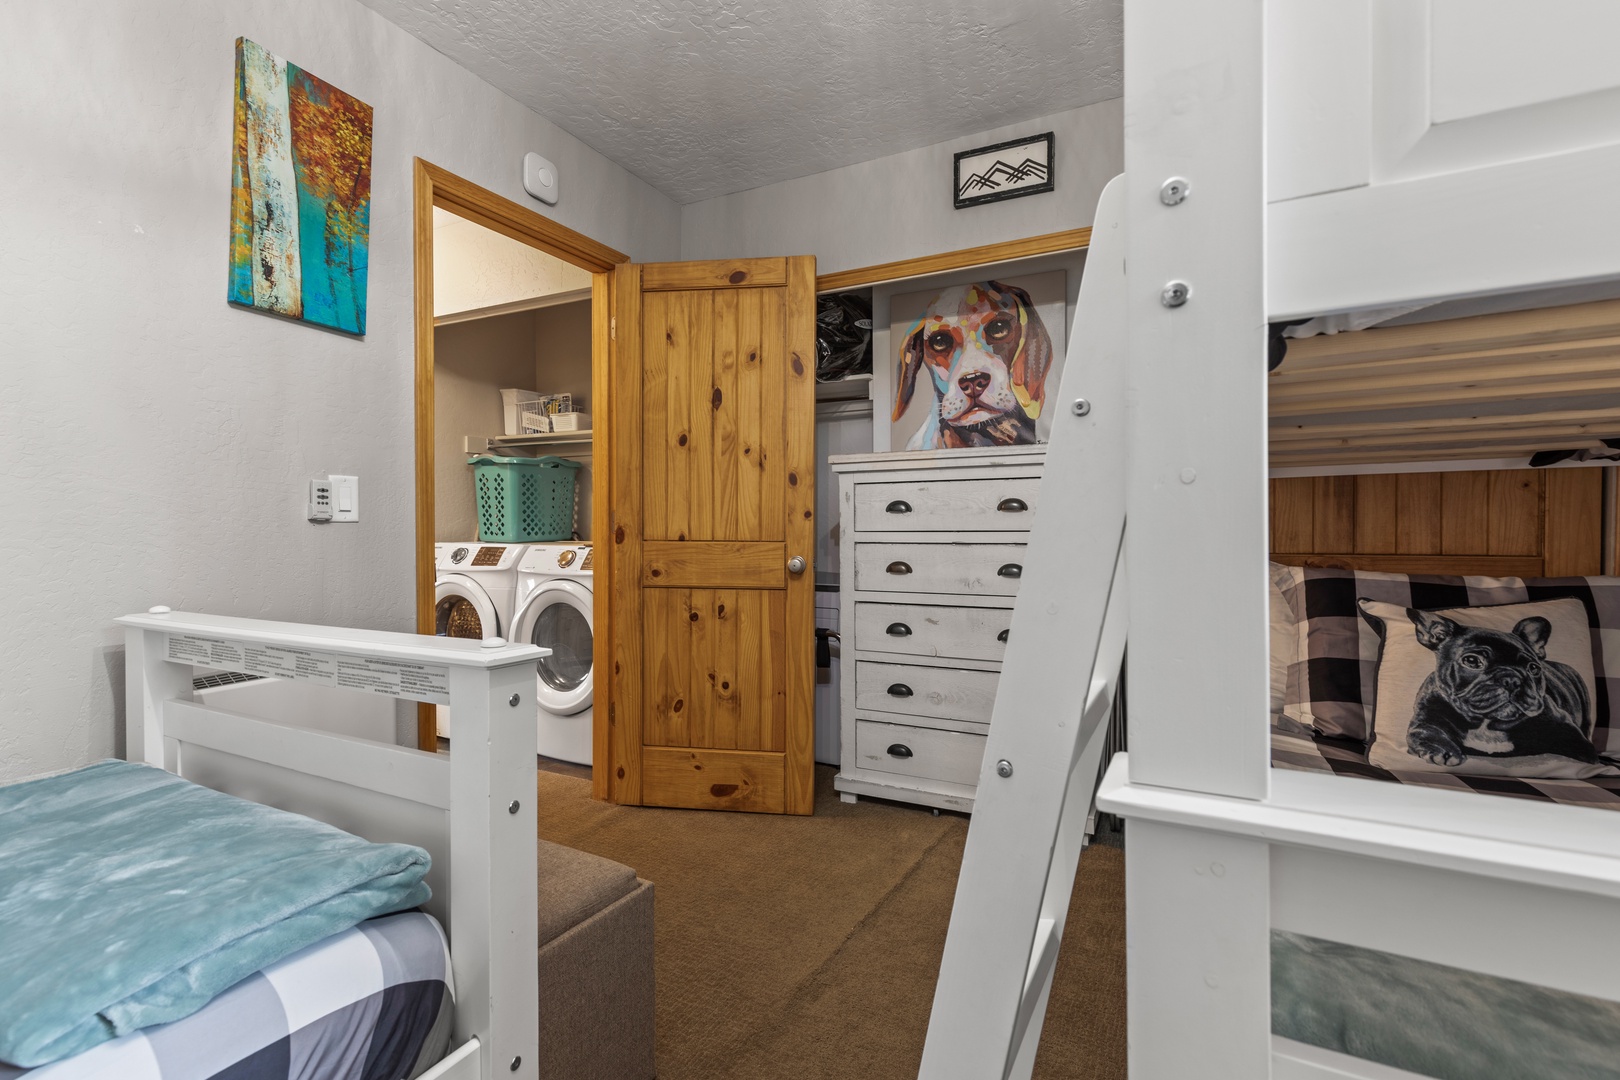 Park City Vacation Rentals, Park City Bungalow on Park Ave - The third bedroom features two twin-over-twin bunk beds and a 40” flat-screen TV, making it an ideal space for kids or young adults